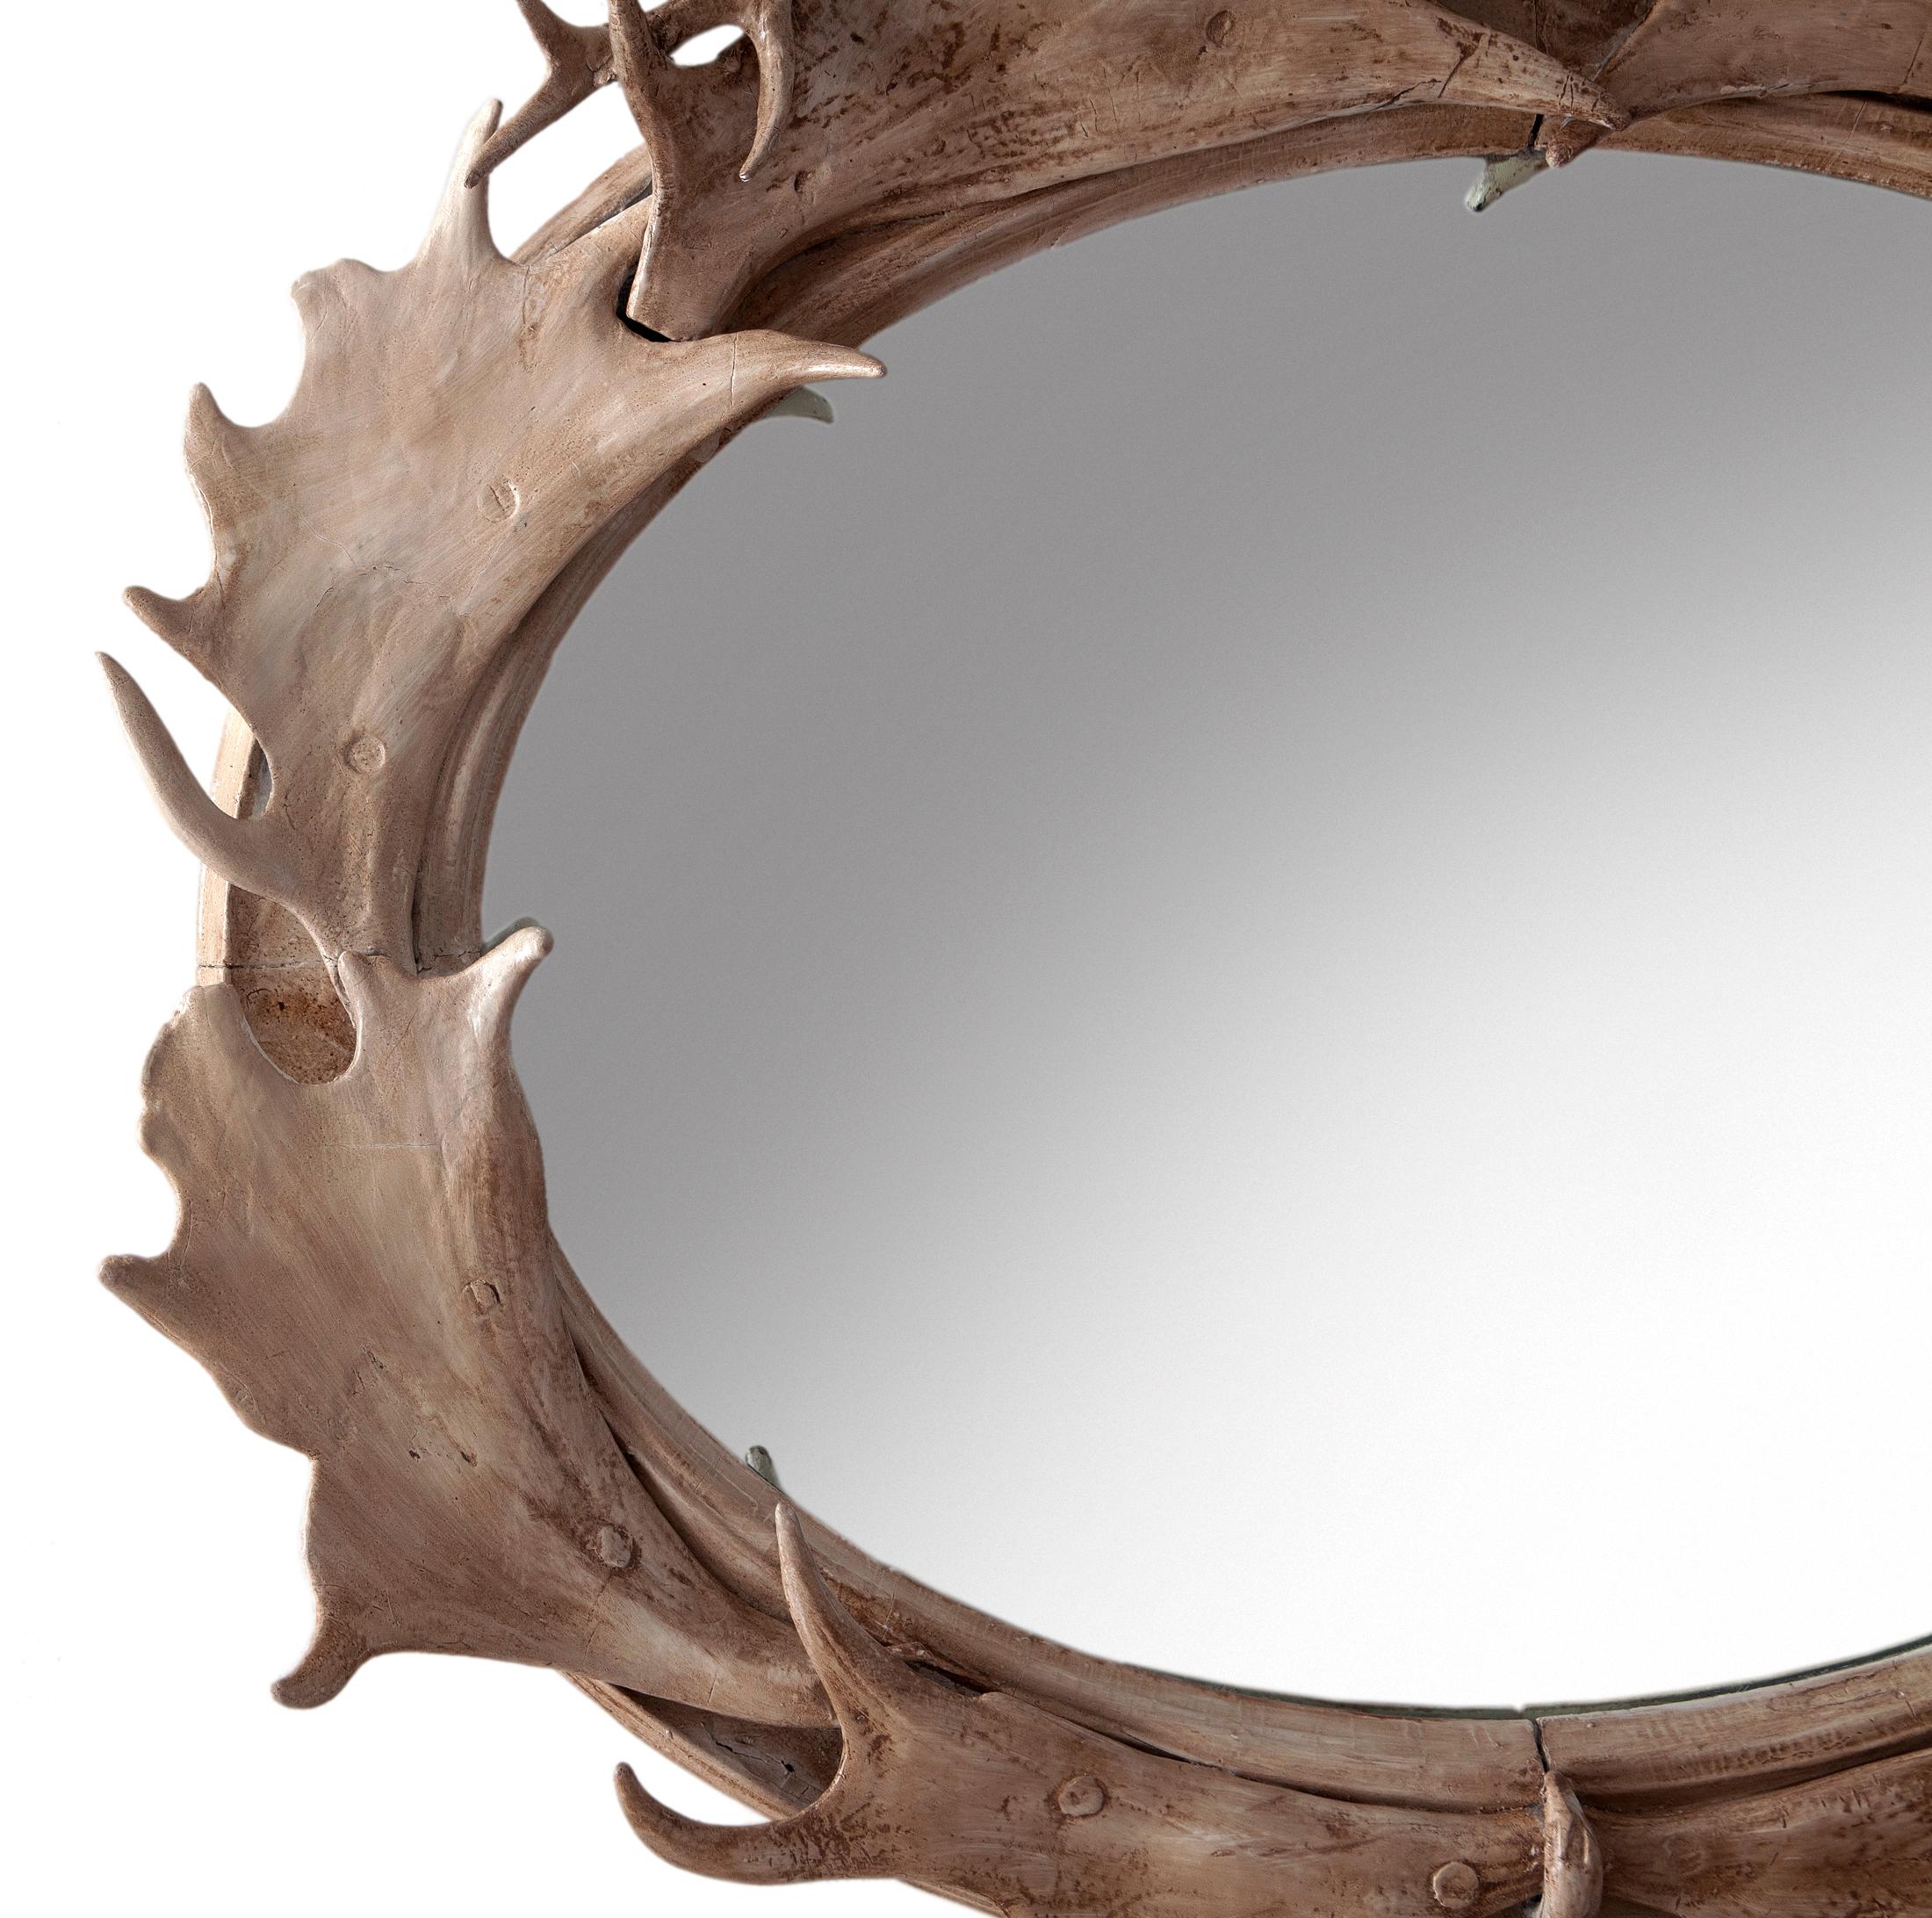 Antique Black Forest antler mirror created in Germany during the late 19thC.
The oval hardwood frame is richly decorated with antlers from the deer & fallow. 
A splendid a & rare creation.
The frame is in very good condition. Restored in oyster